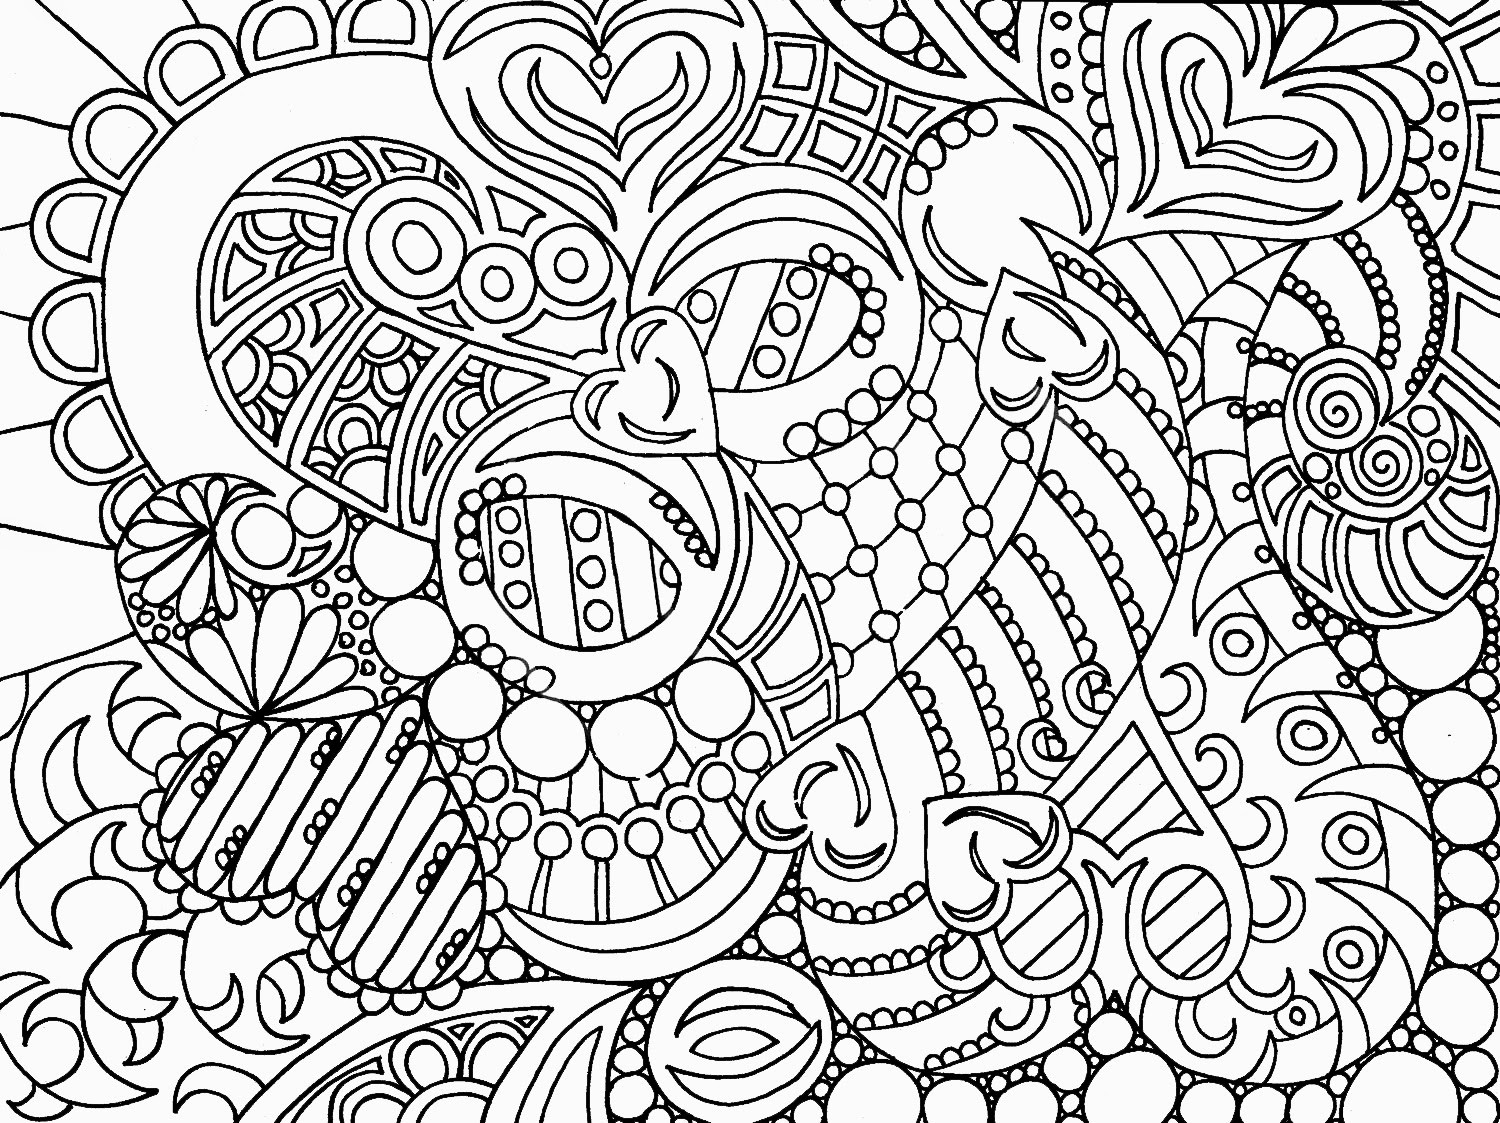 Coloring Art For Kids
 Coloring Sheet for Kids – Coloring Pages Blog